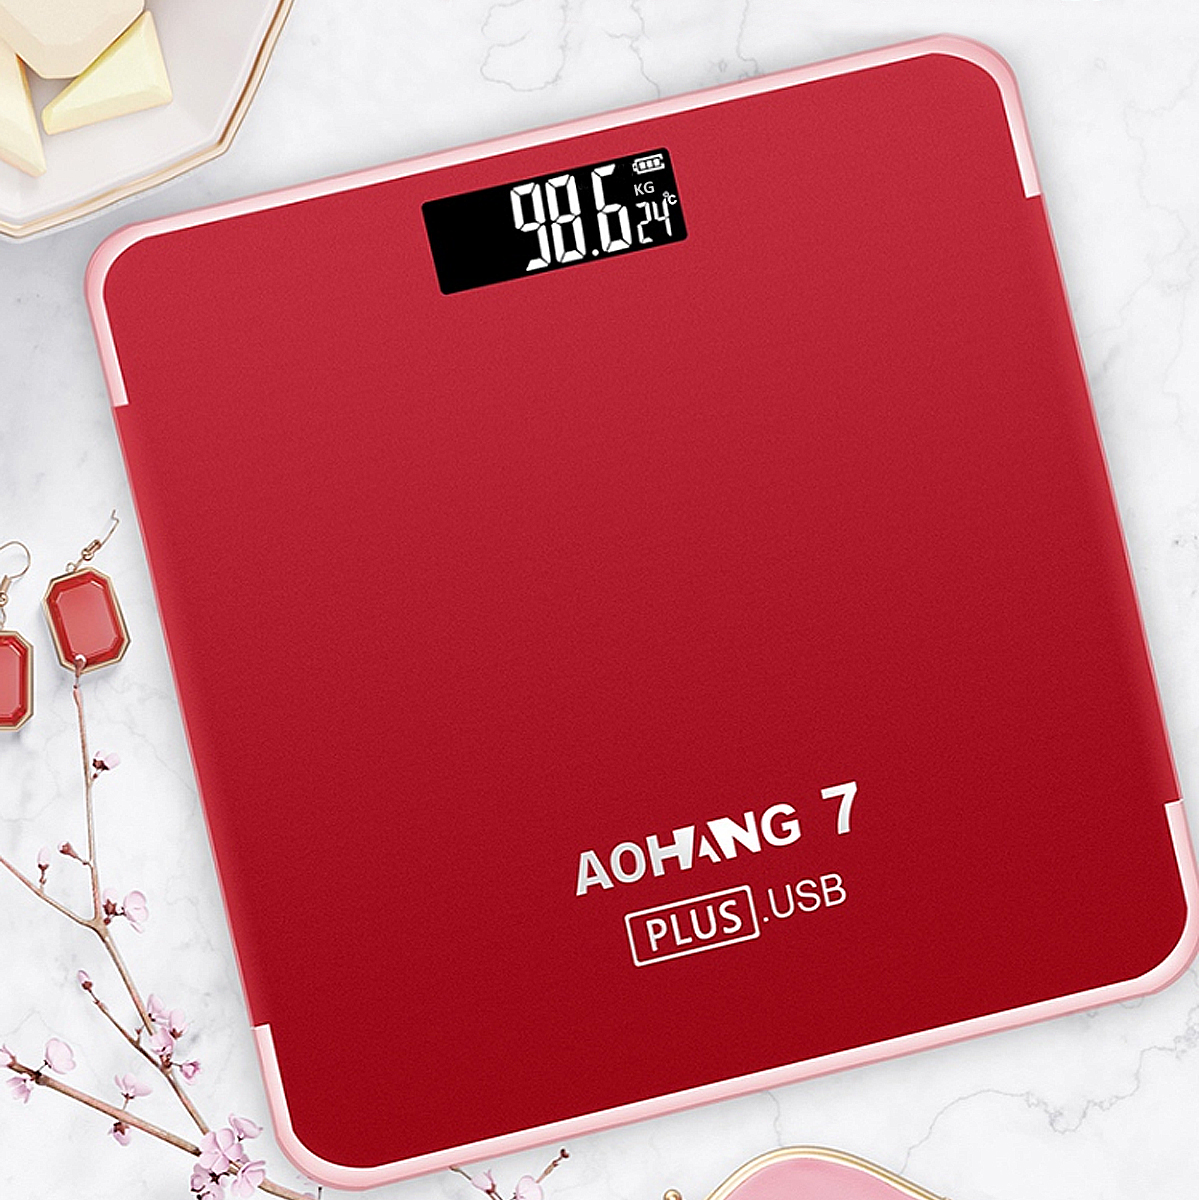 AOHANG-7-Plus-USB-Version-180kg-LCD-Electronic-Digital-Tempered-Glass-Body-Weight-Scale-1238740